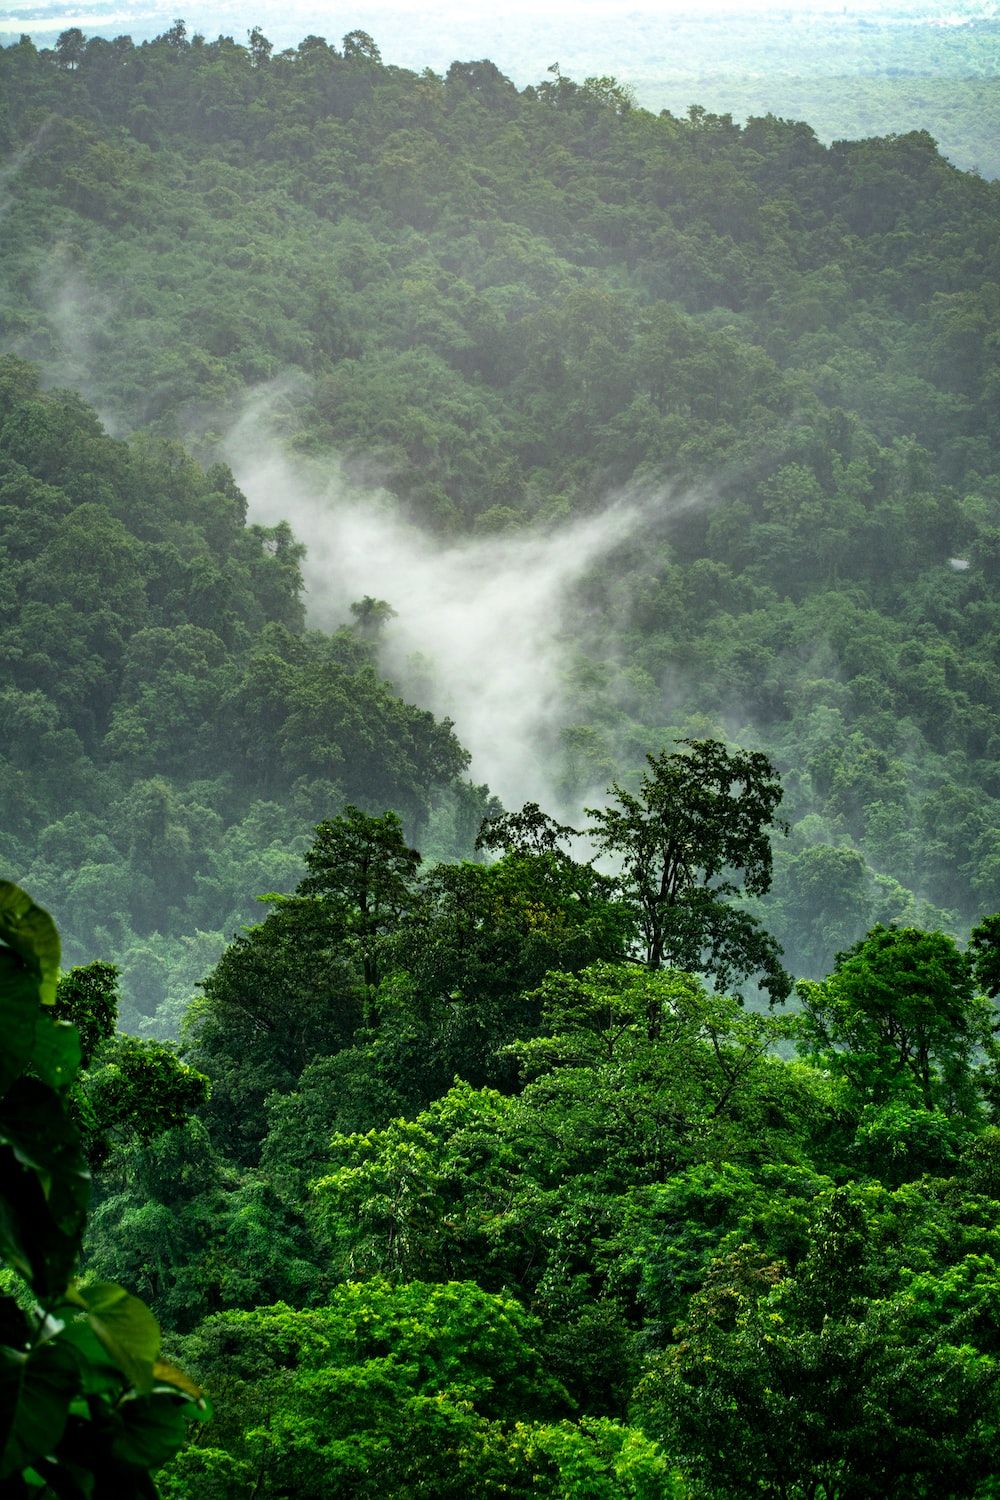 A misty cloud in the middle of a lush green forest. - Jungle